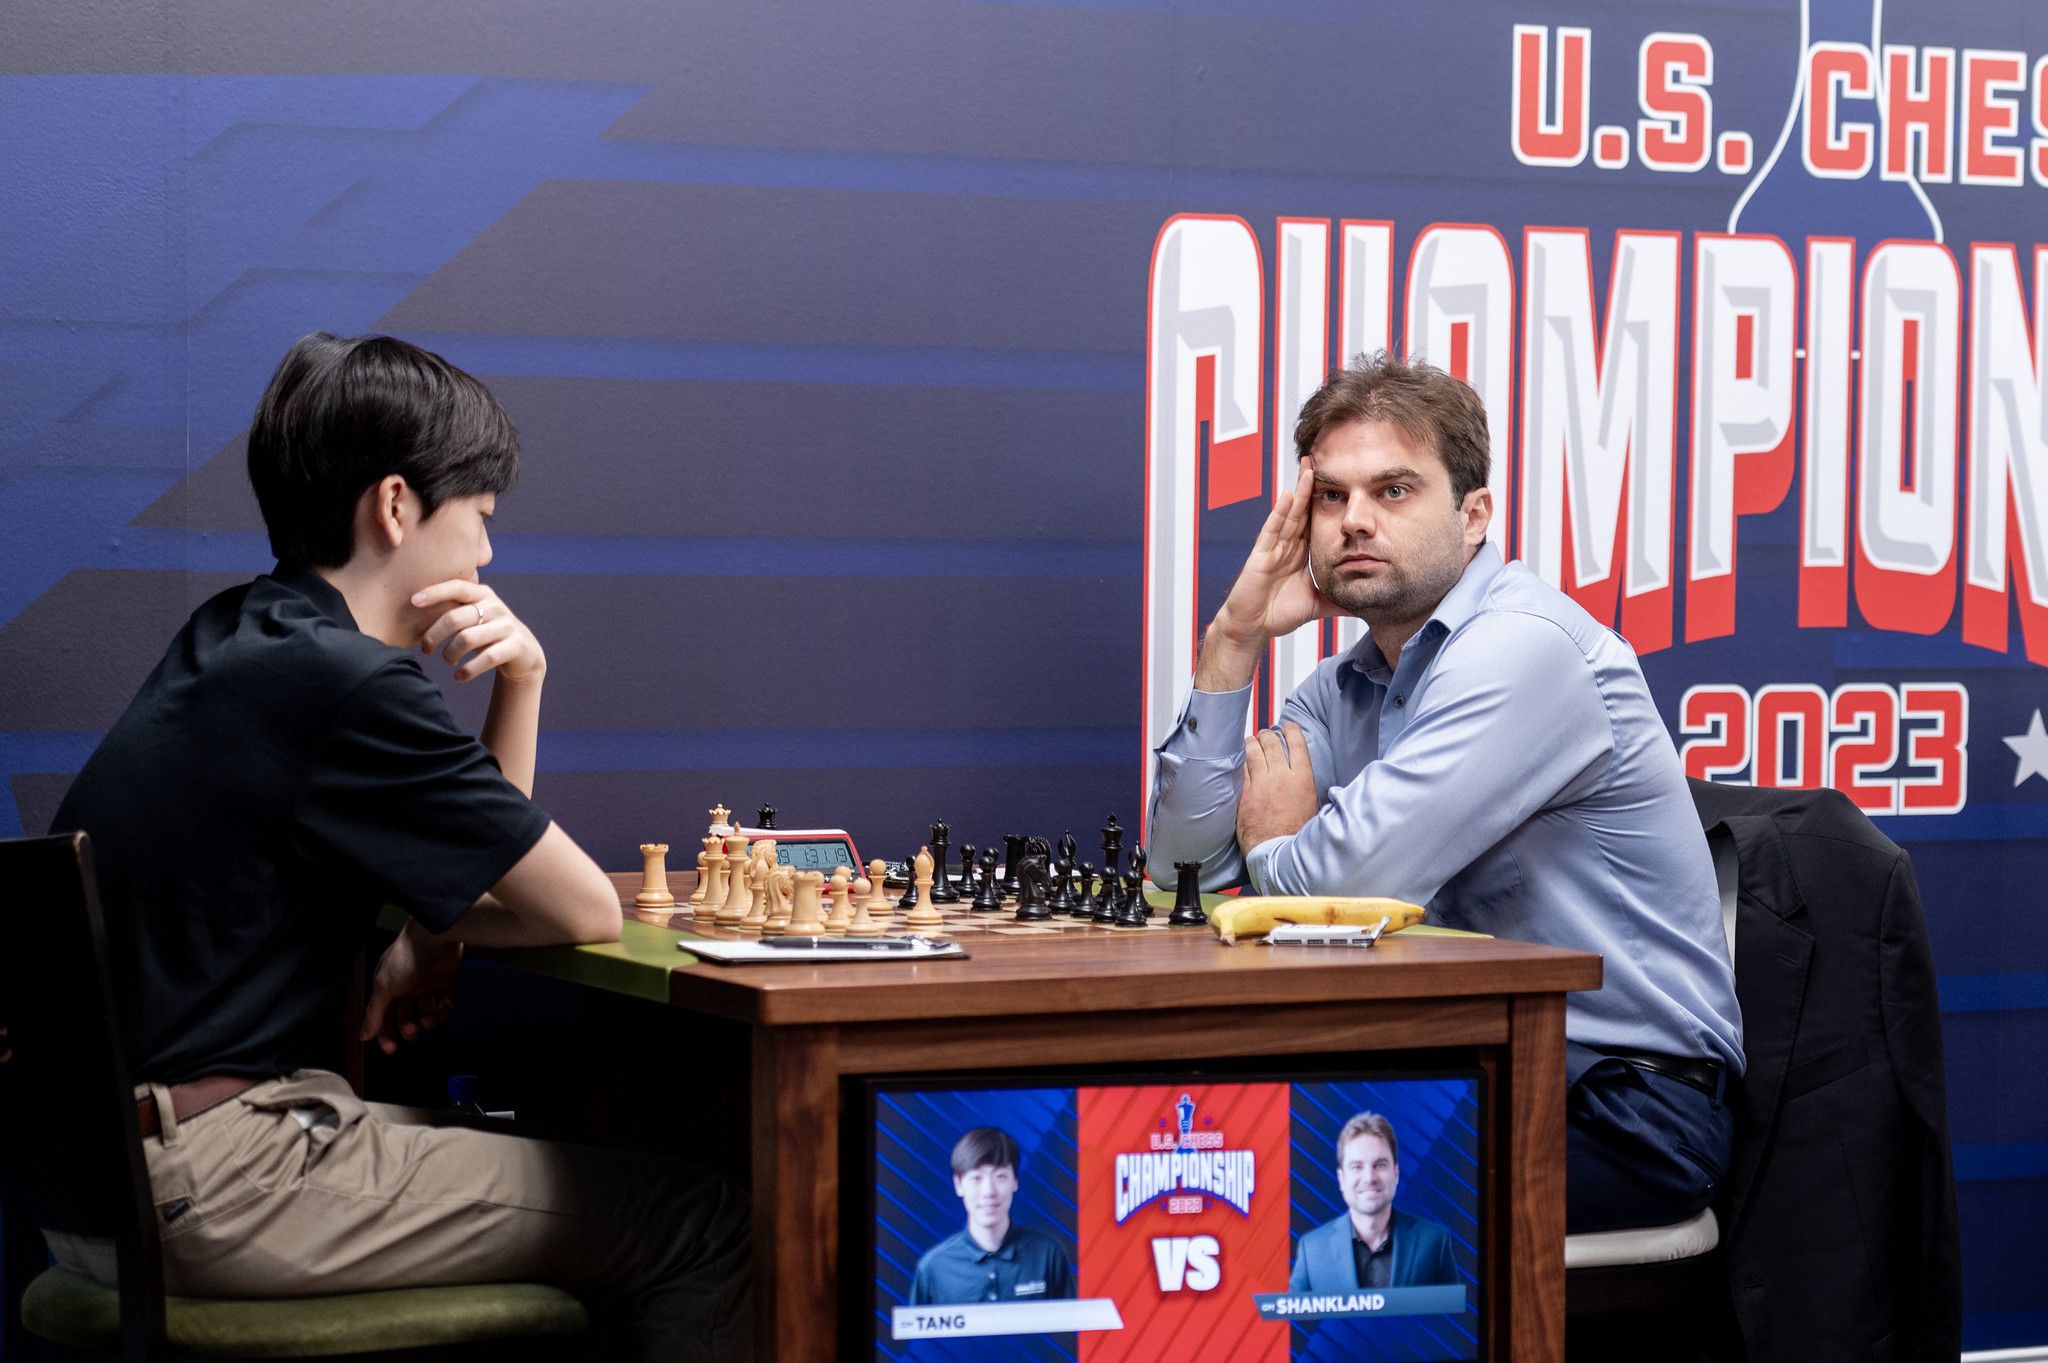 fpawn chess blog: Looking Back at the Olympiad for Disabled